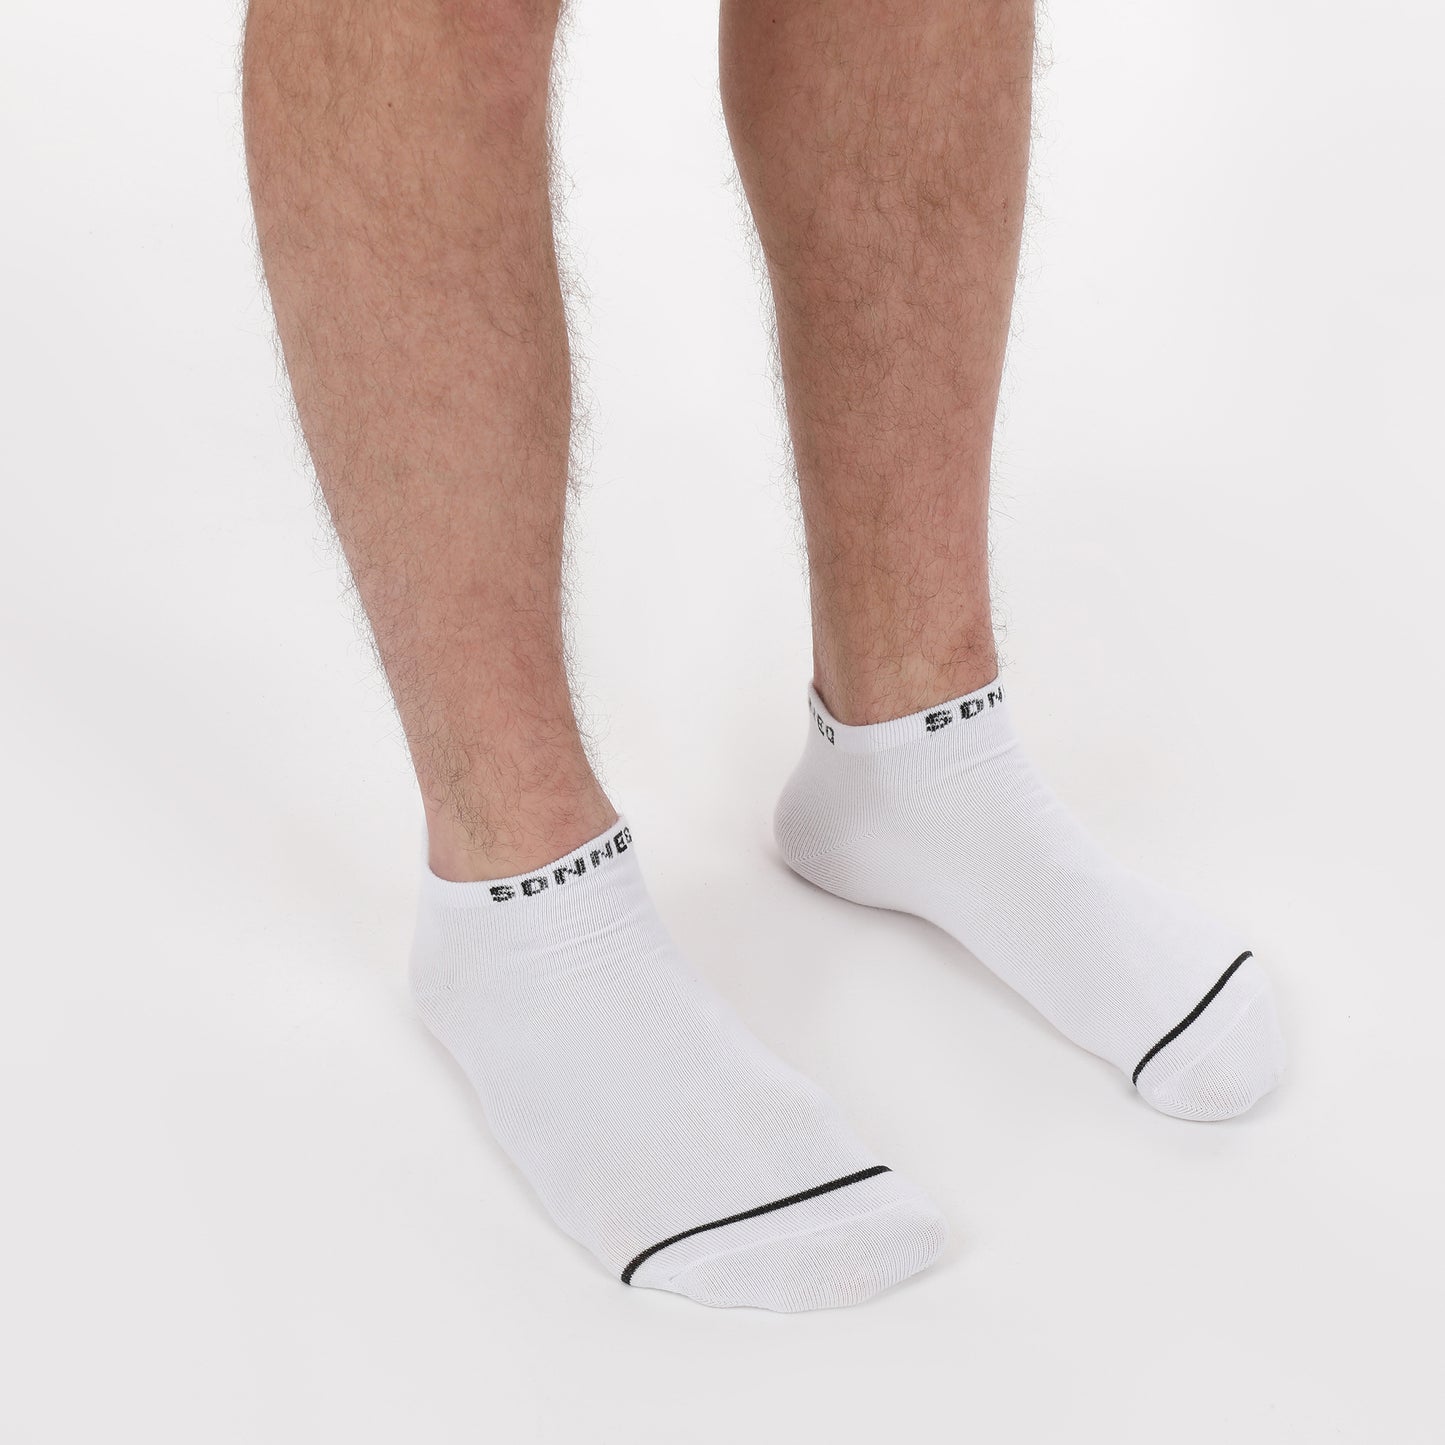 White unisex, fashionable, low cut sports and casual Socks - pack of 5 and 10 pairs